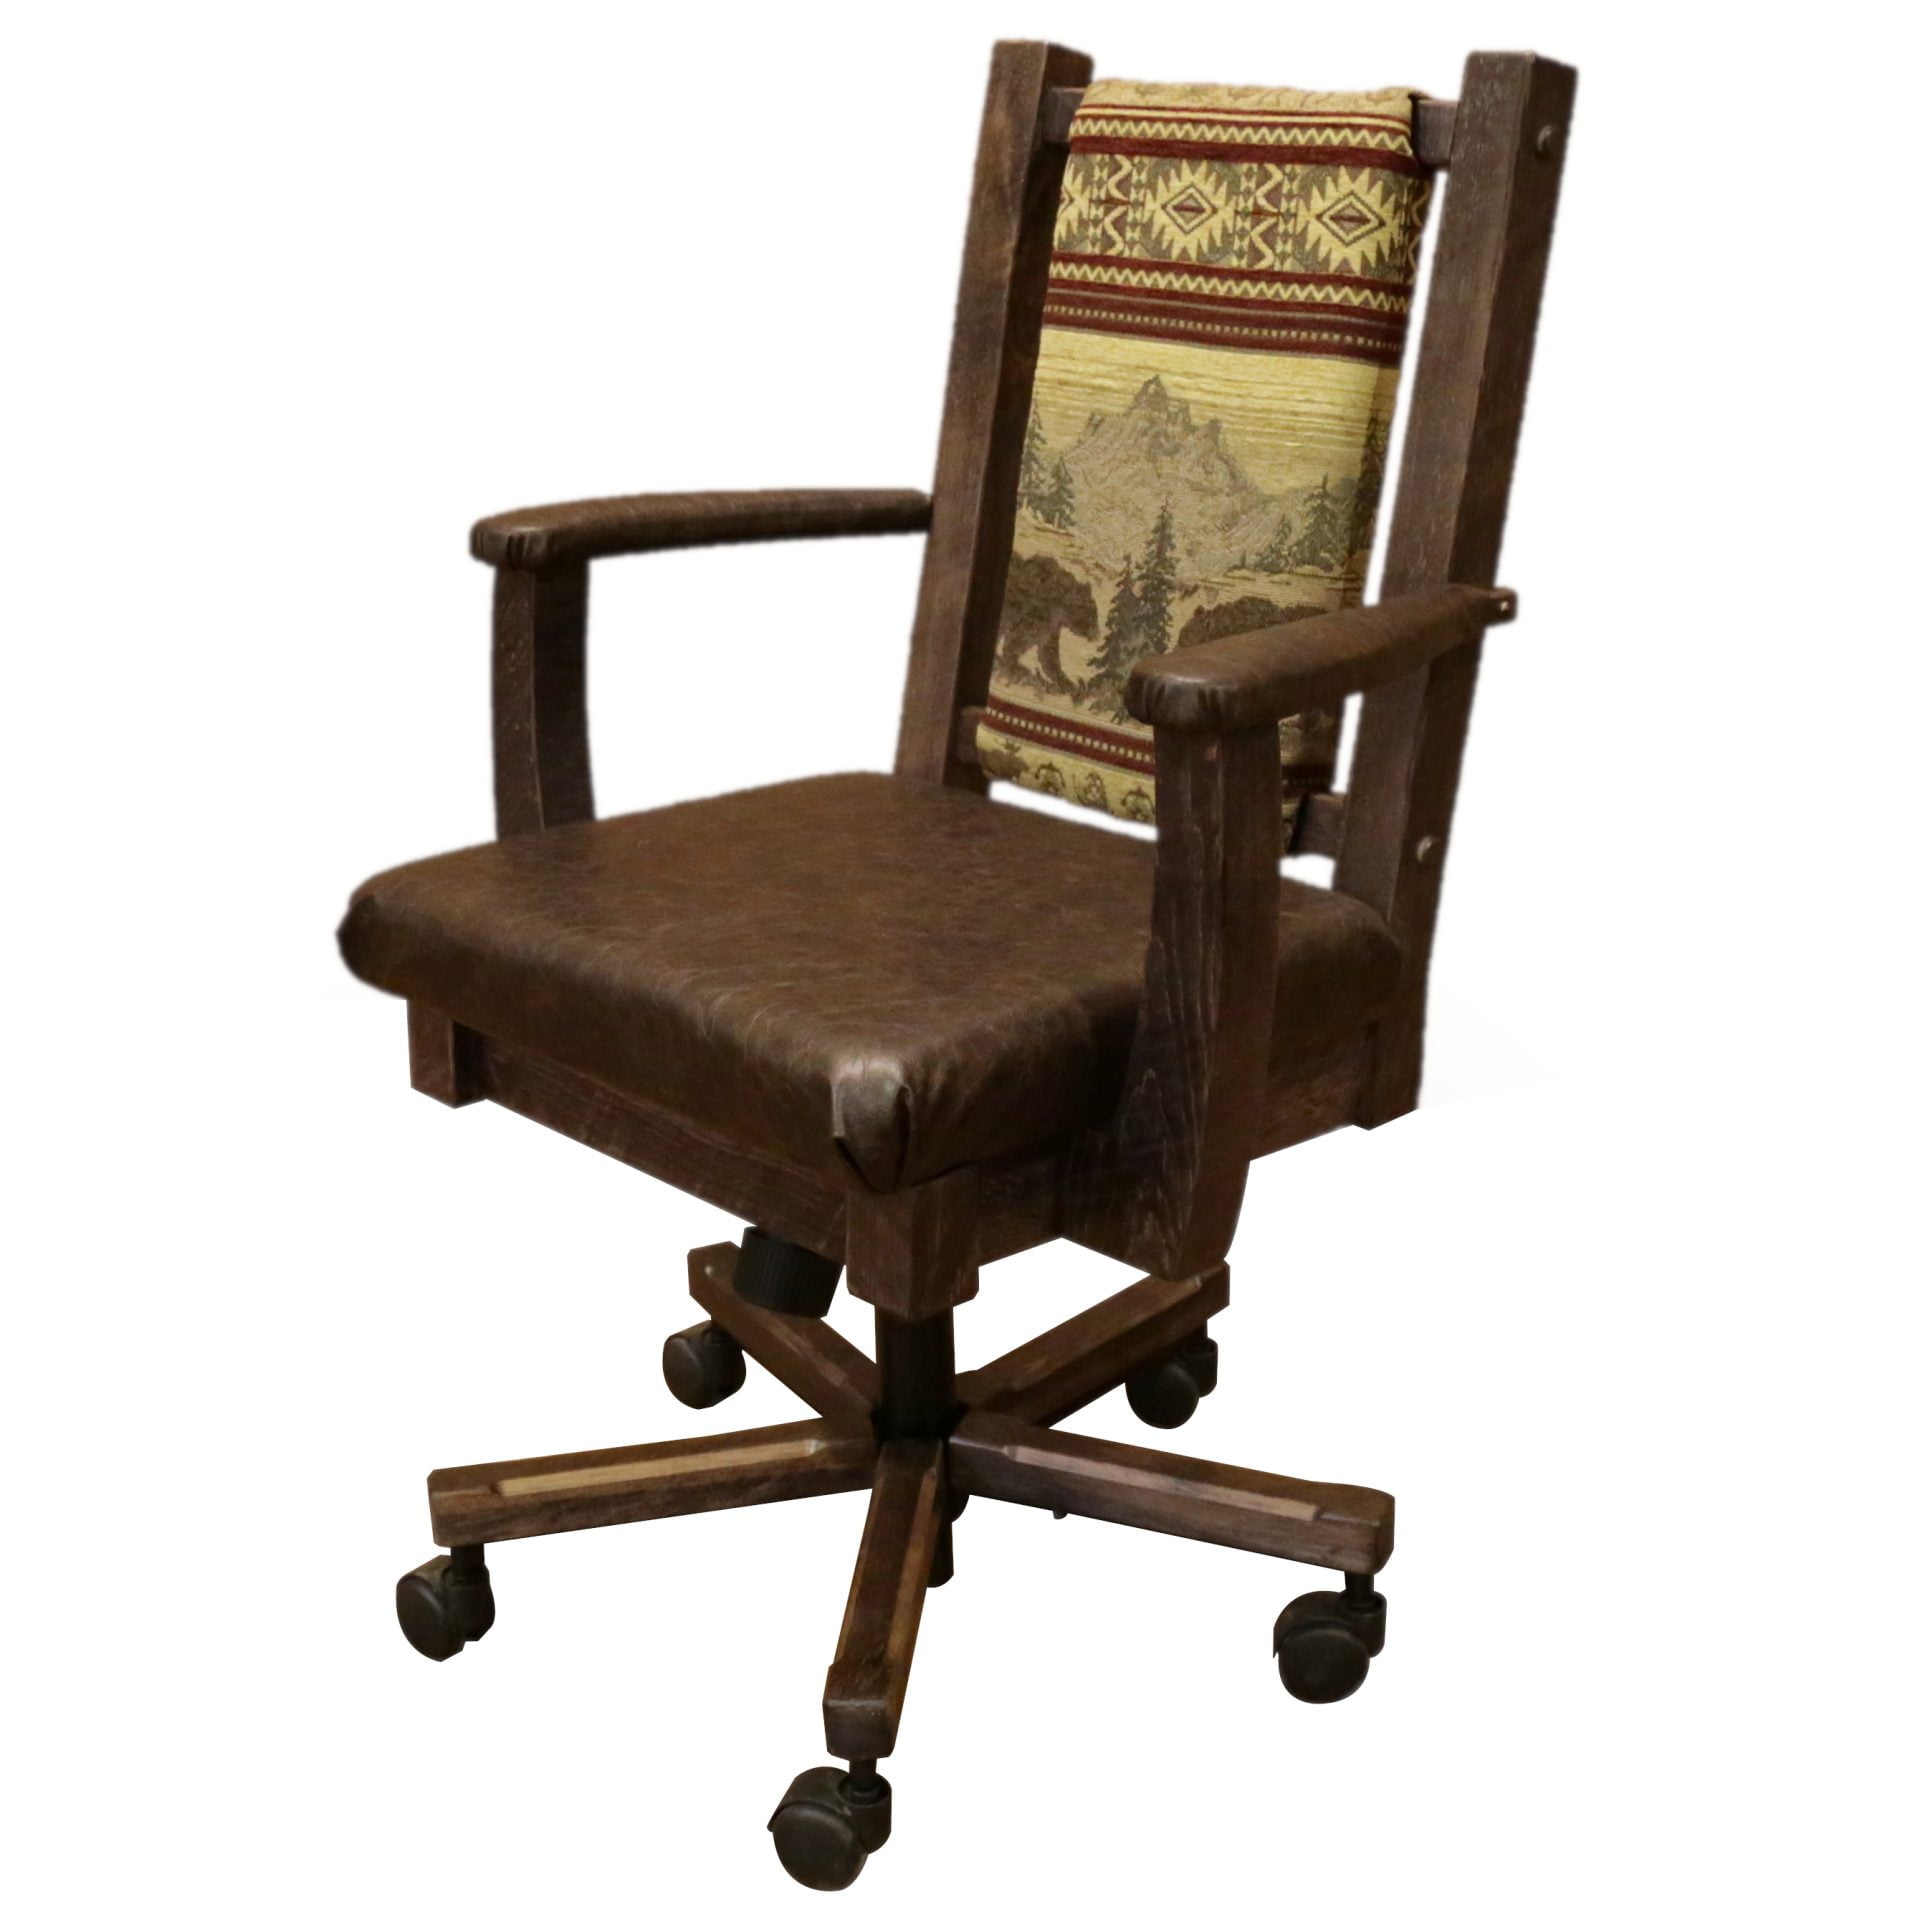 Barnwood Style Timber Peg Upholstered Office Chair